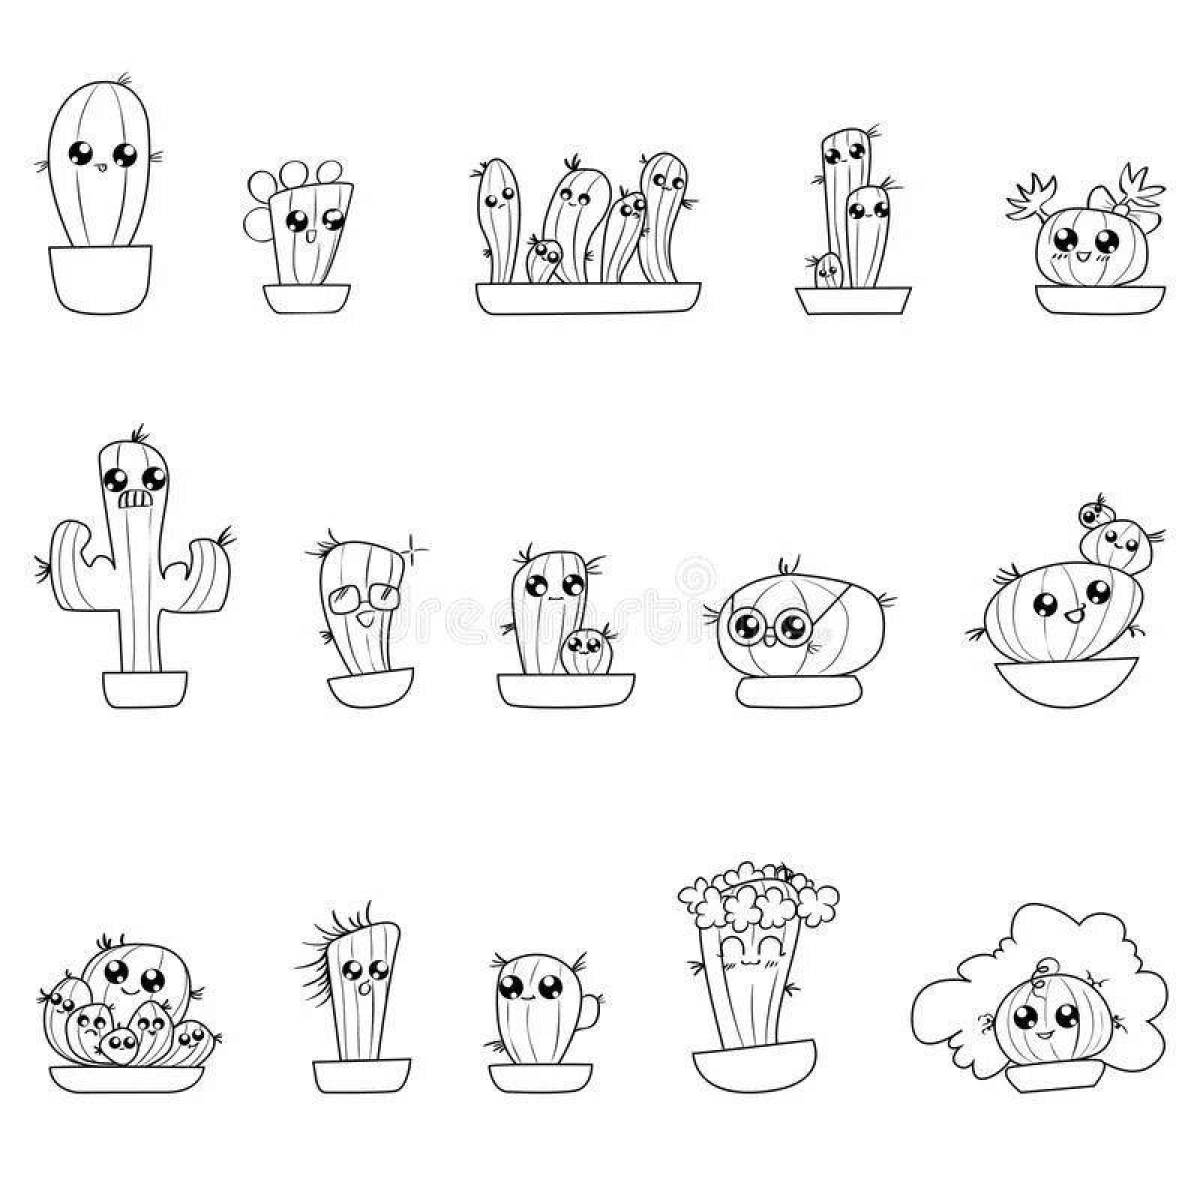 Playful cactus coloring page